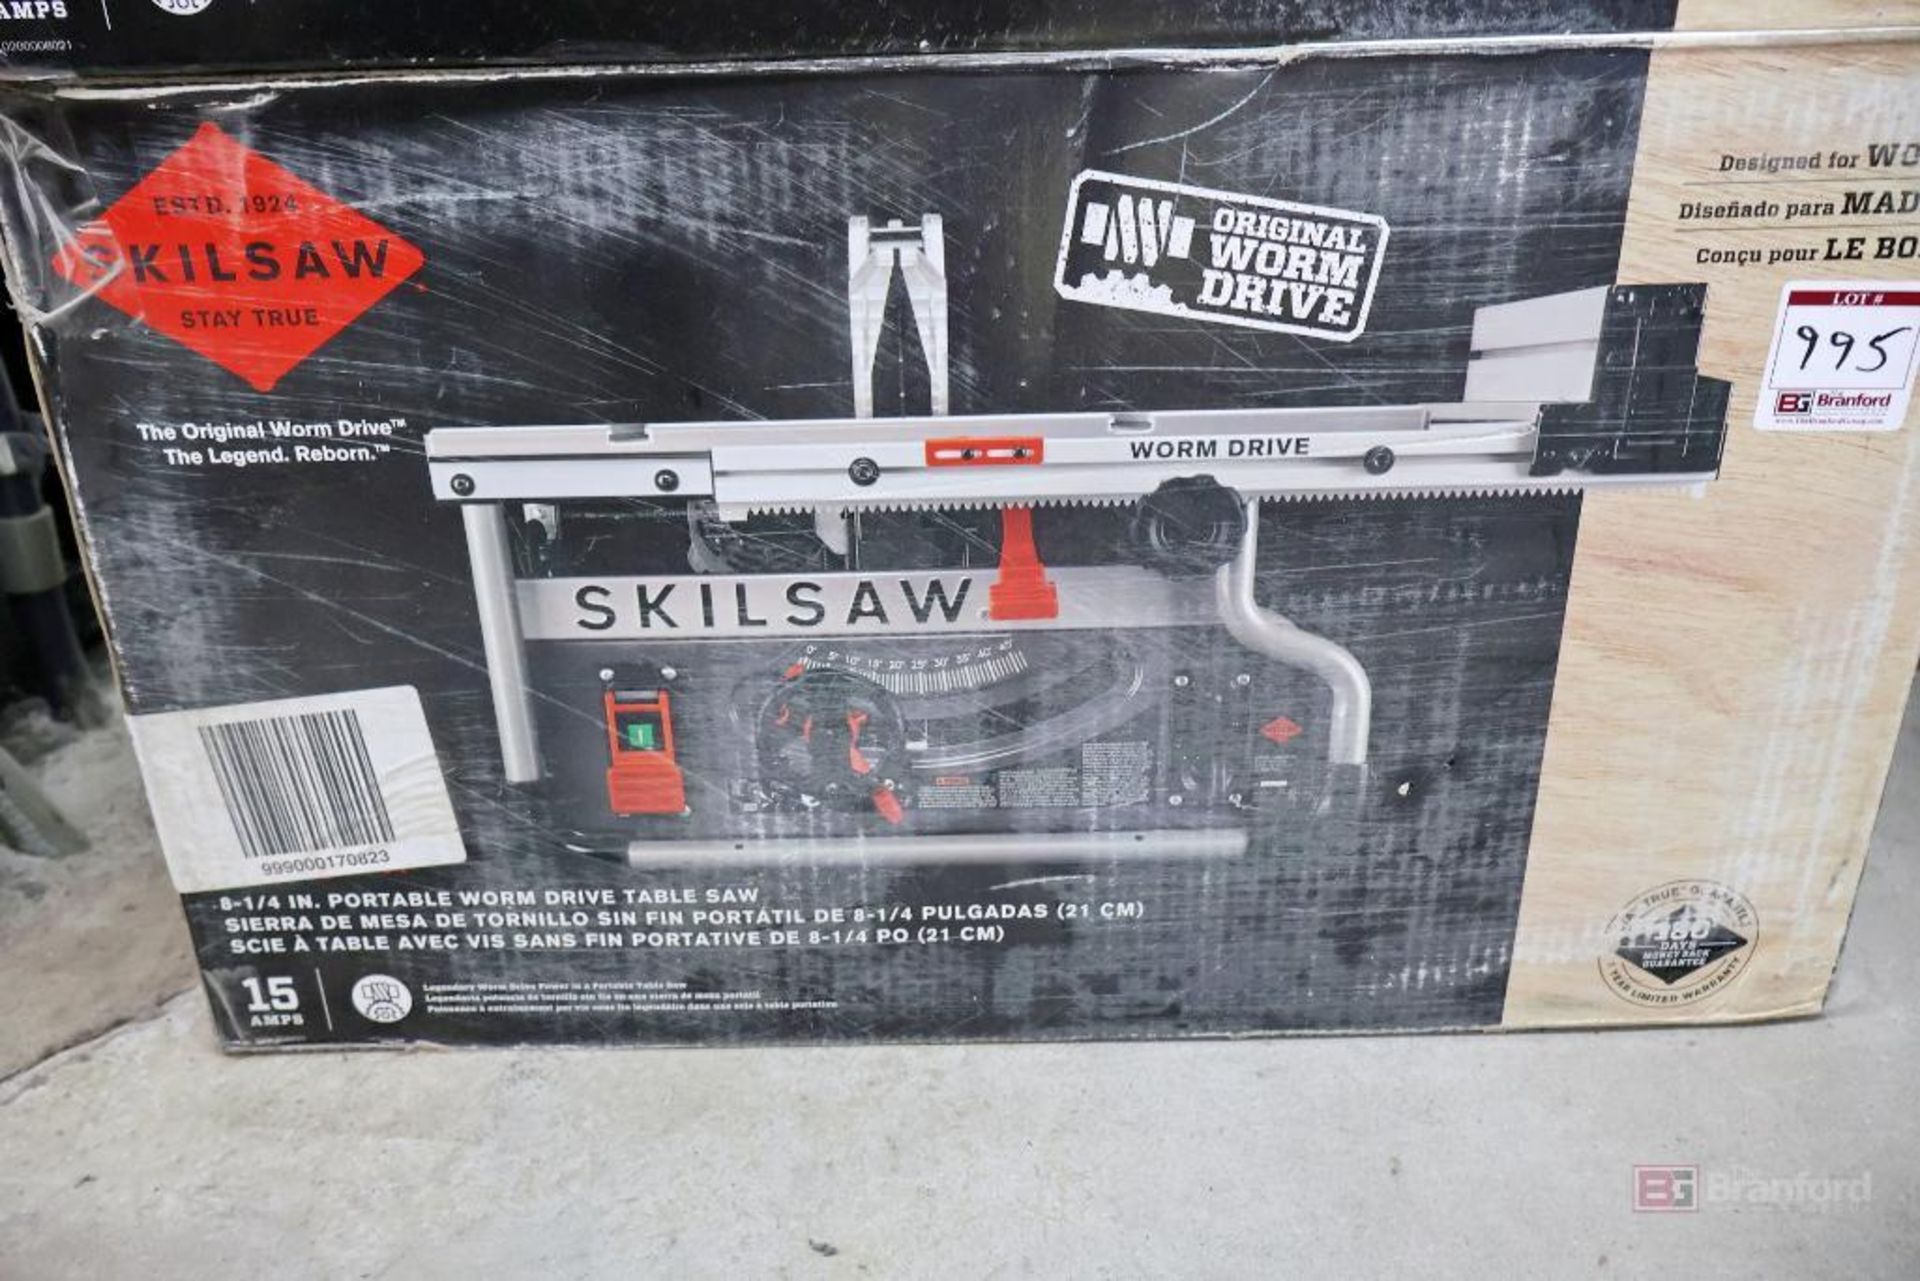 SKILSAW SPT 99 T-01 Portable Worm Drive Table Saw - Image 8 of 10